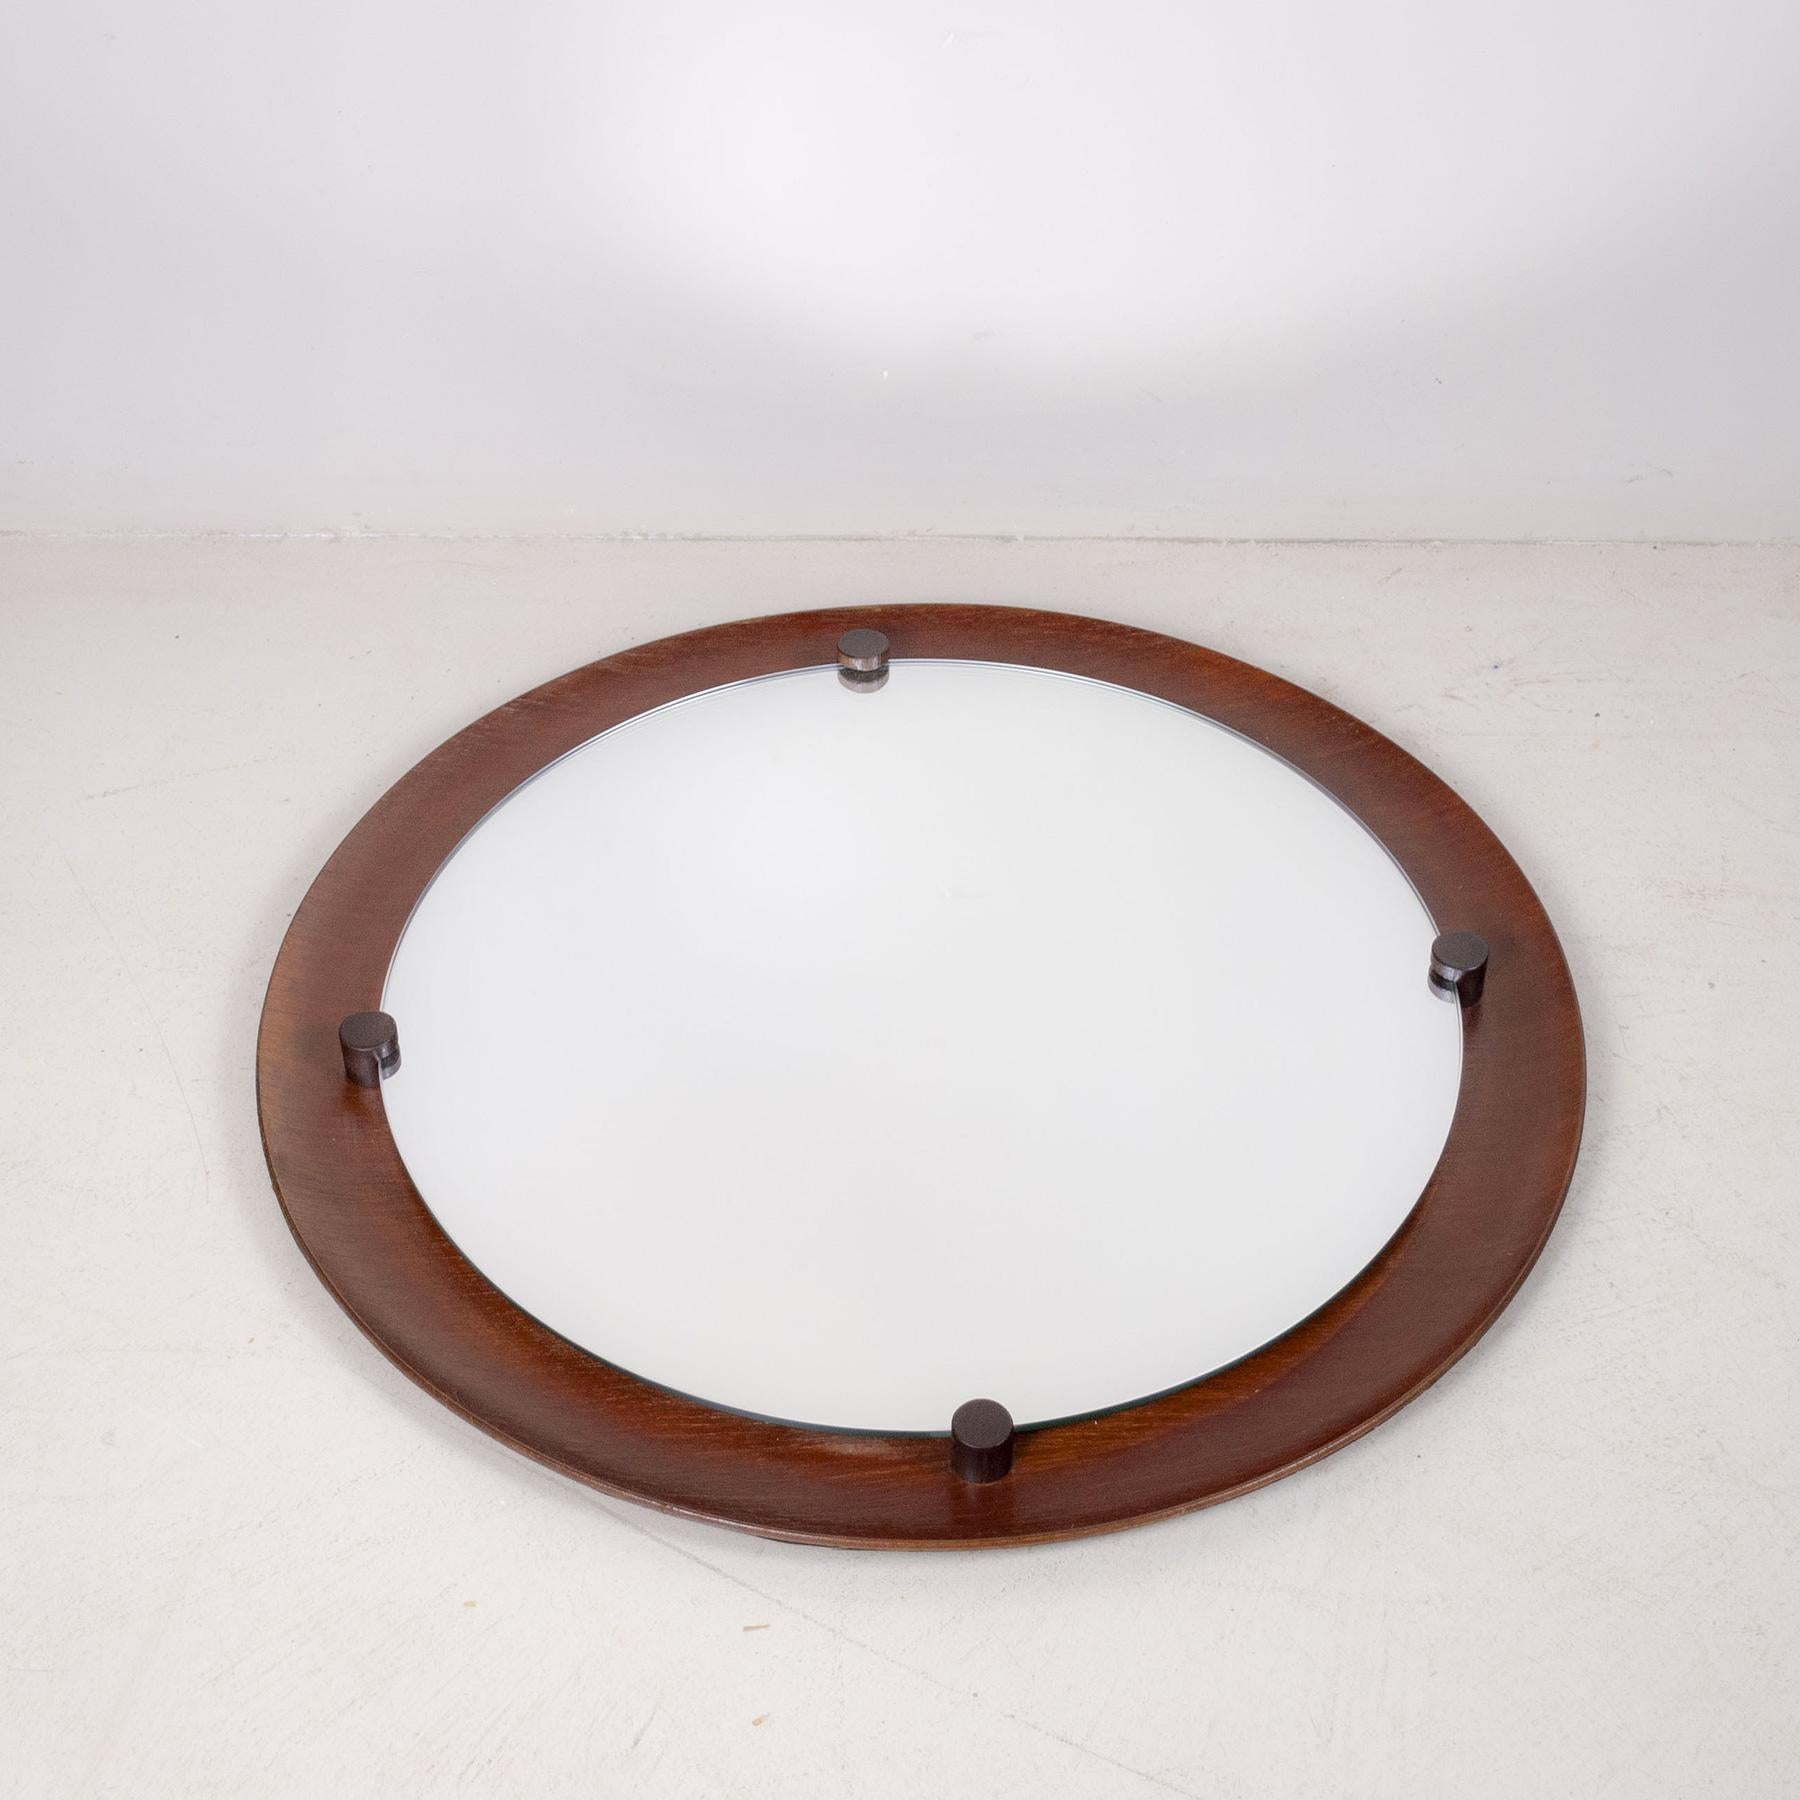 Round teak wood wall mirror design Campo & Graffi Italy 60’s.
Much of Carlo Graffi's professional career is linked to that of Franco Campo; they met as undergraduates at the Turin Polytechnic. They both studied engineering and architecture with